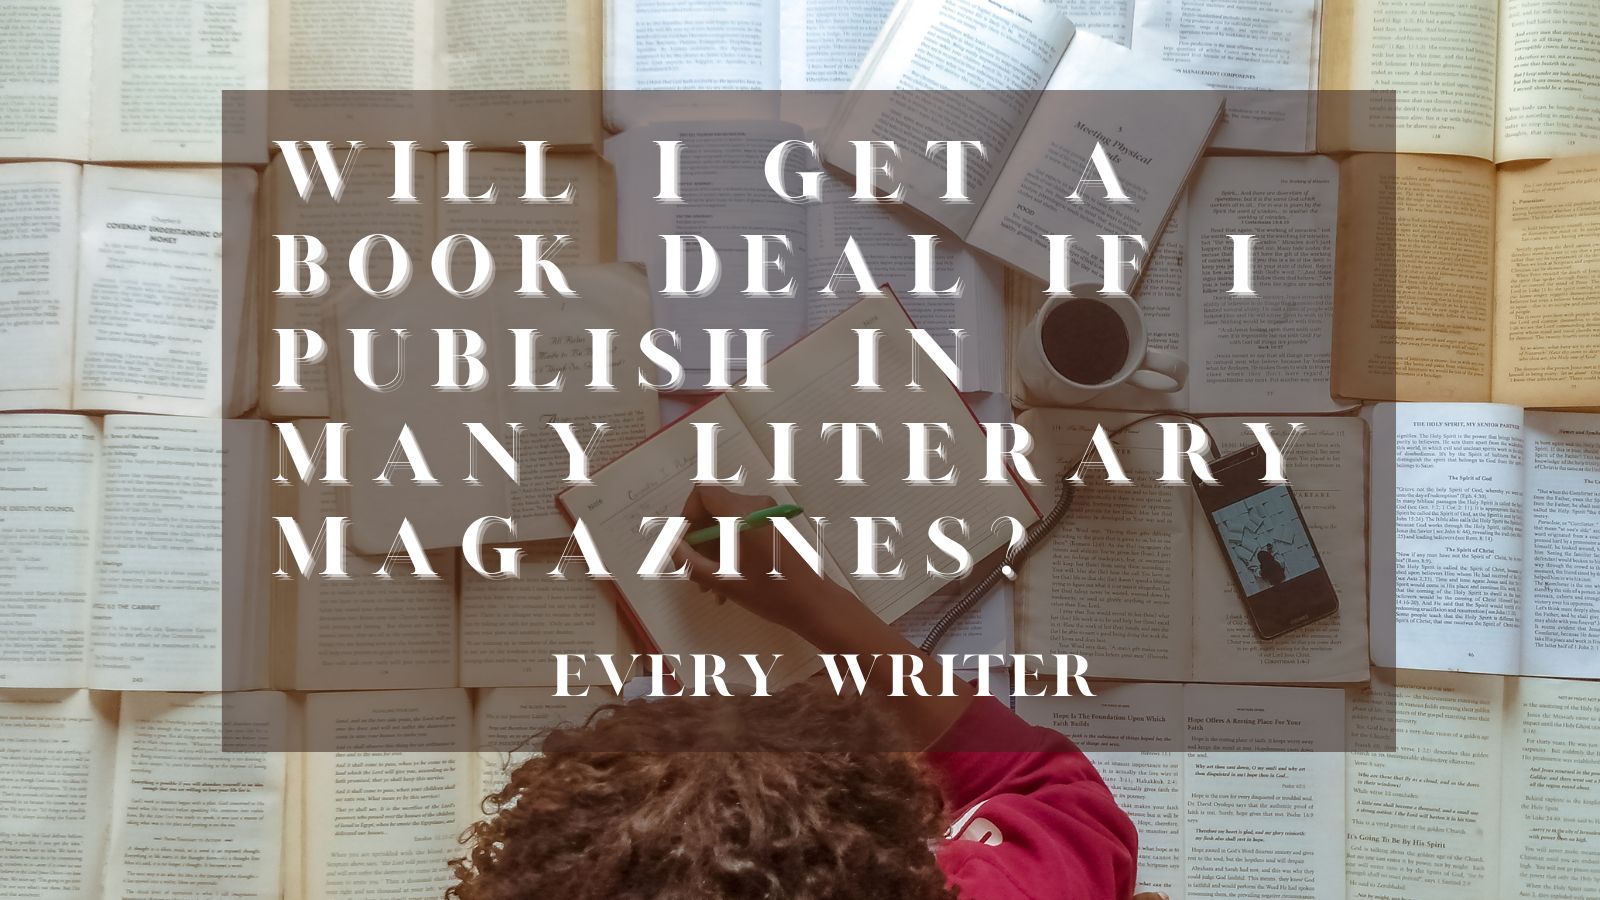 Will-I-get-a-book-deal-if-I-publish-in-many-literary-magazines